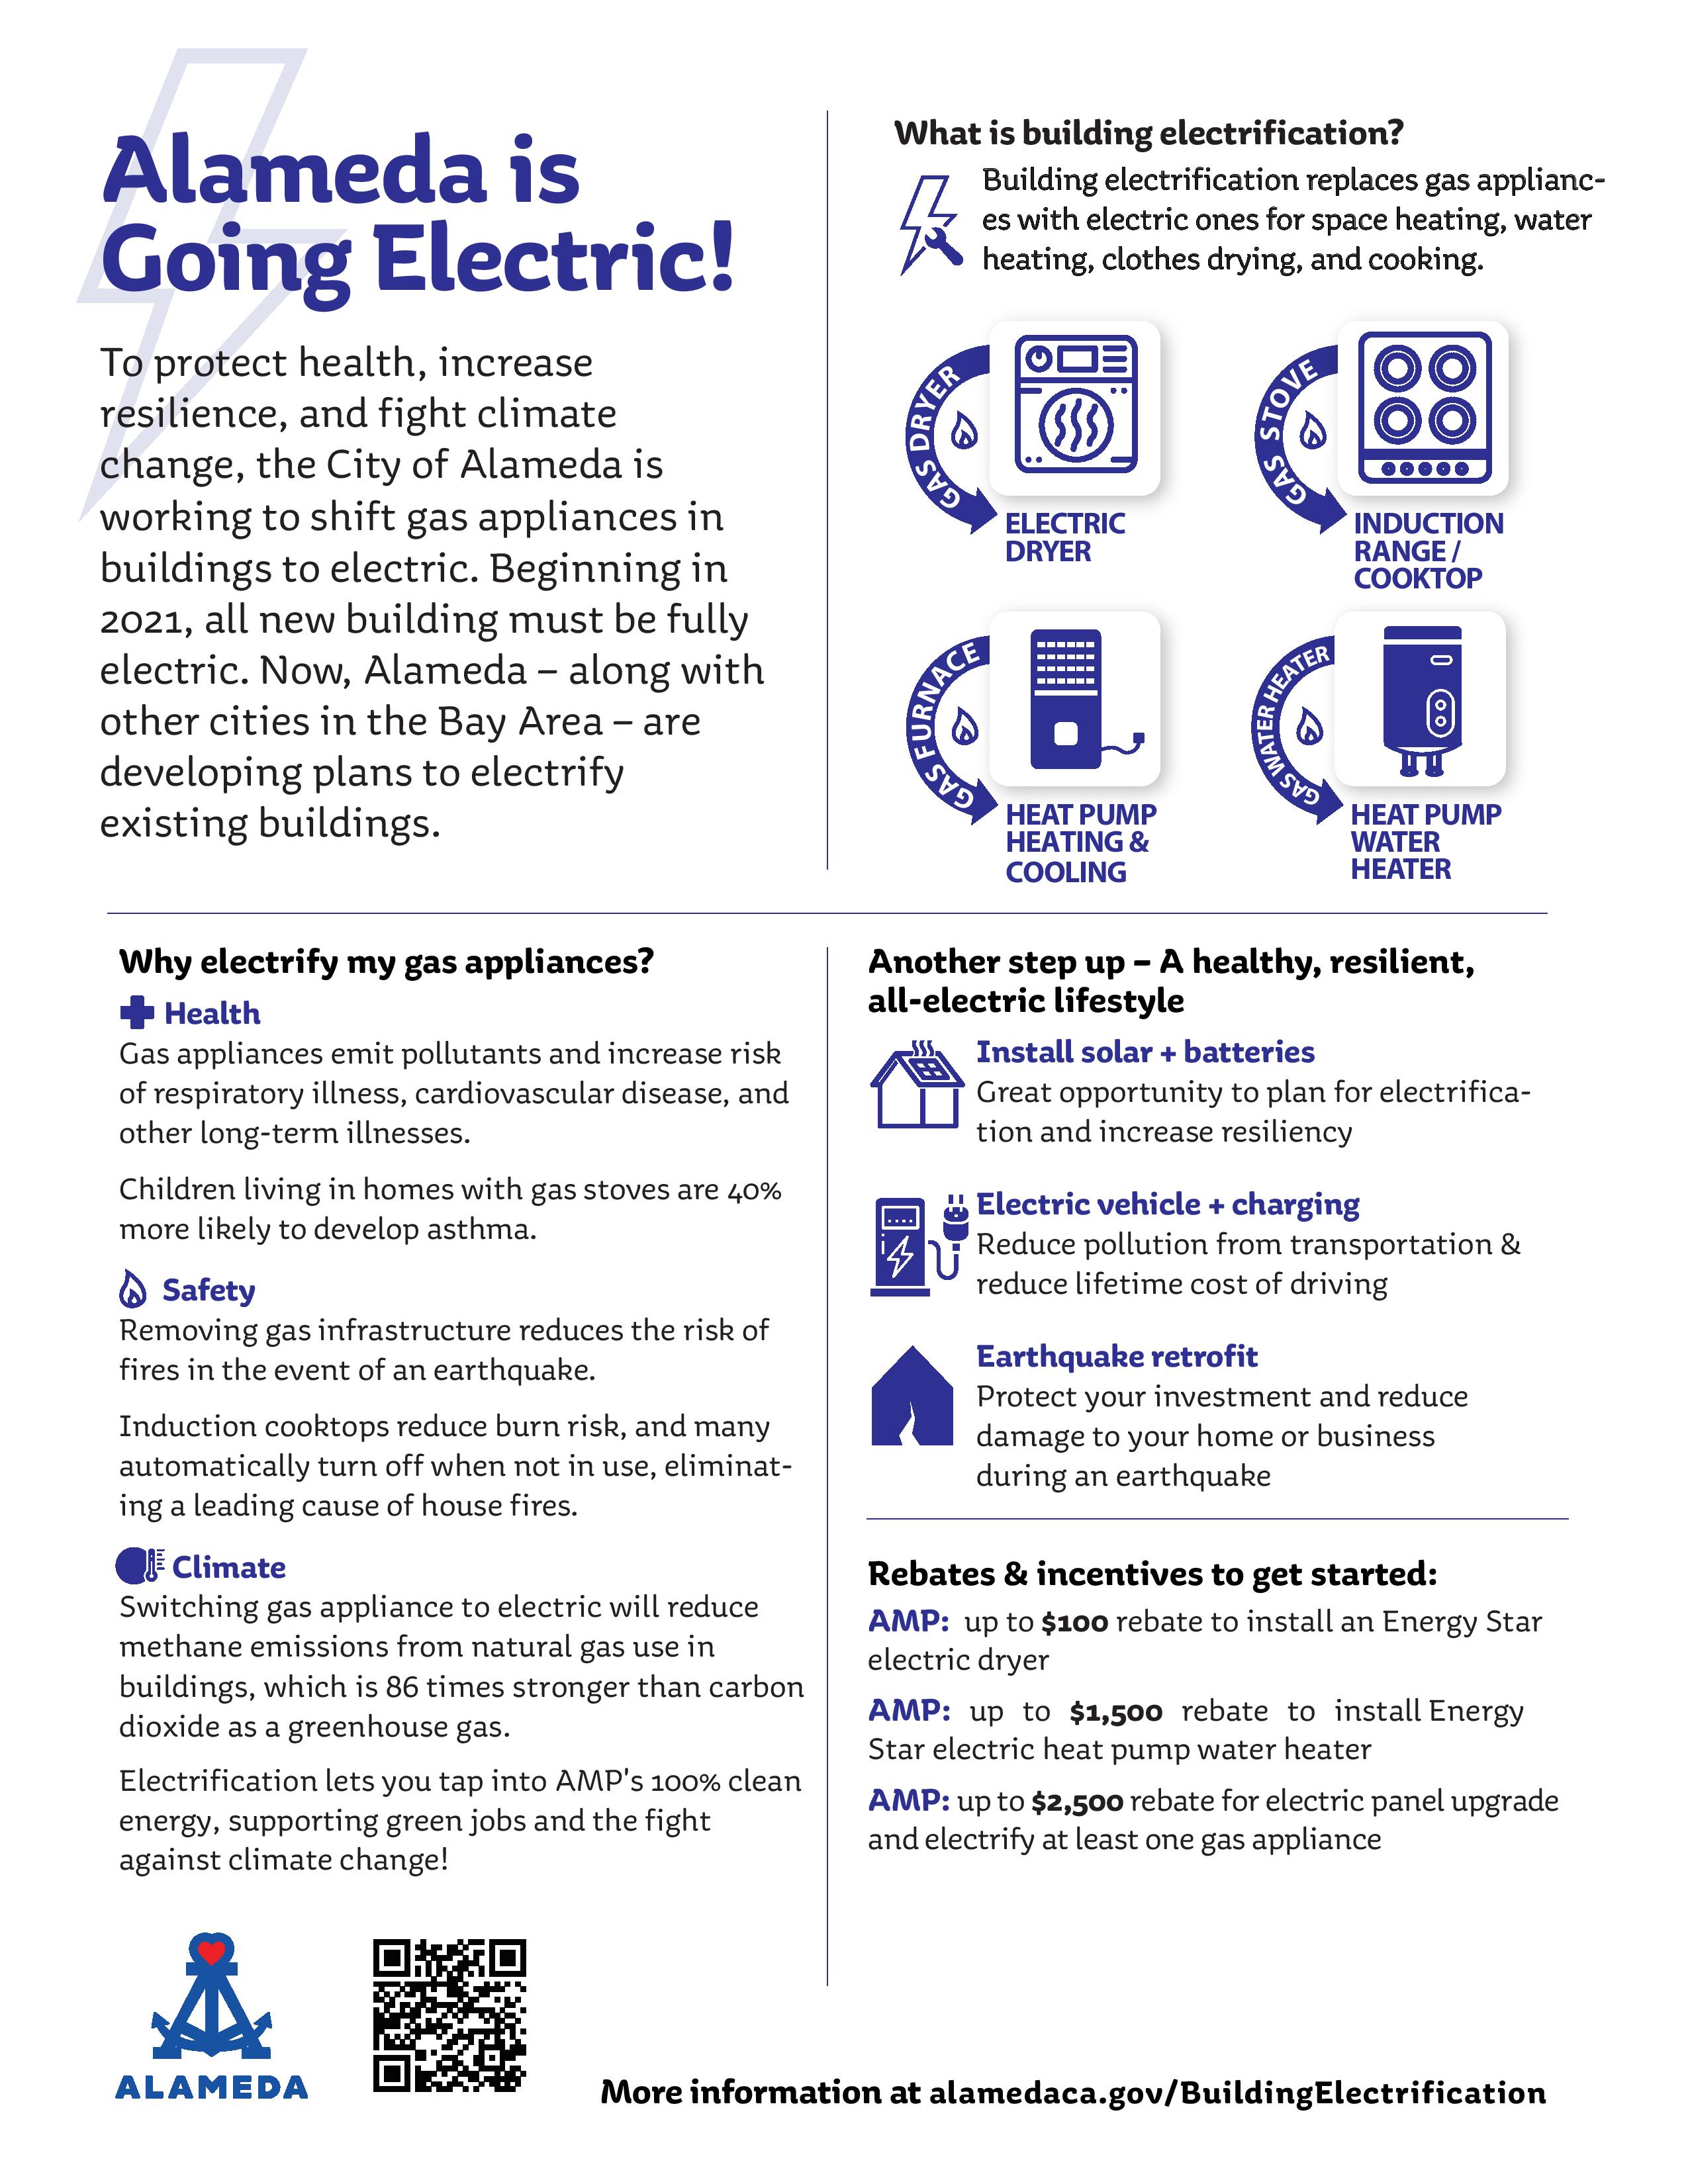 electrification-infographic-en_5.18.2022-page-001.jpg